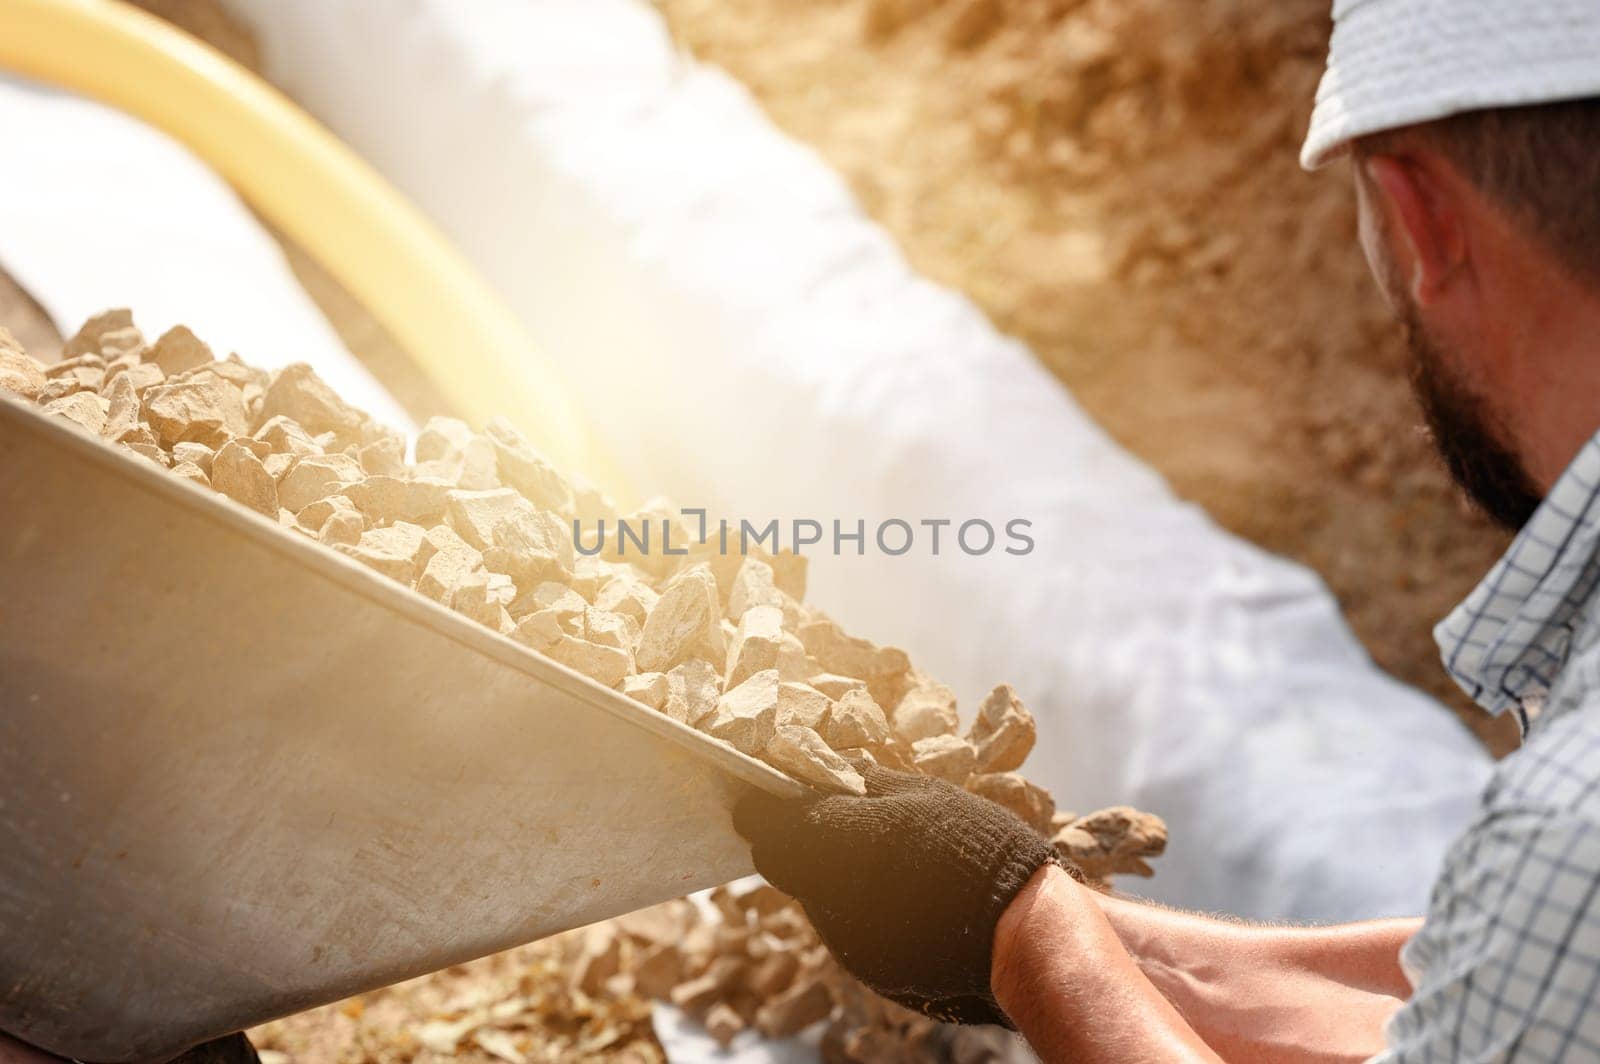 Drainage works for drainage of ground water. A man pours rubble crushed stone from a wheelbarrow into a trench close up. by Niko_Cingaryuk